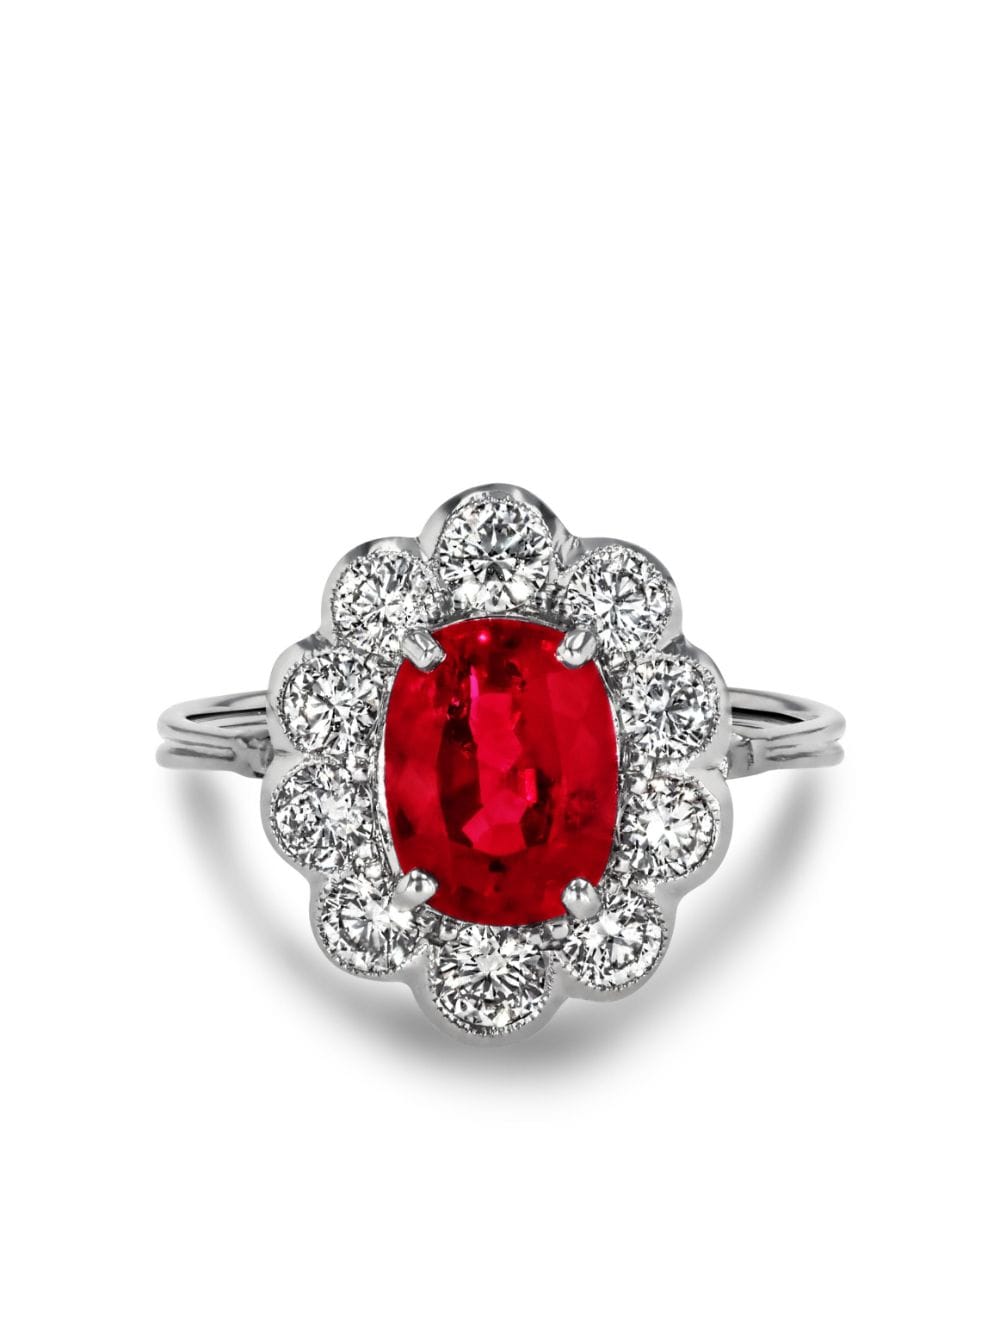 Pragnell Vintage 18kt white gold Antique Inspired ruby and diamond ring - Silver